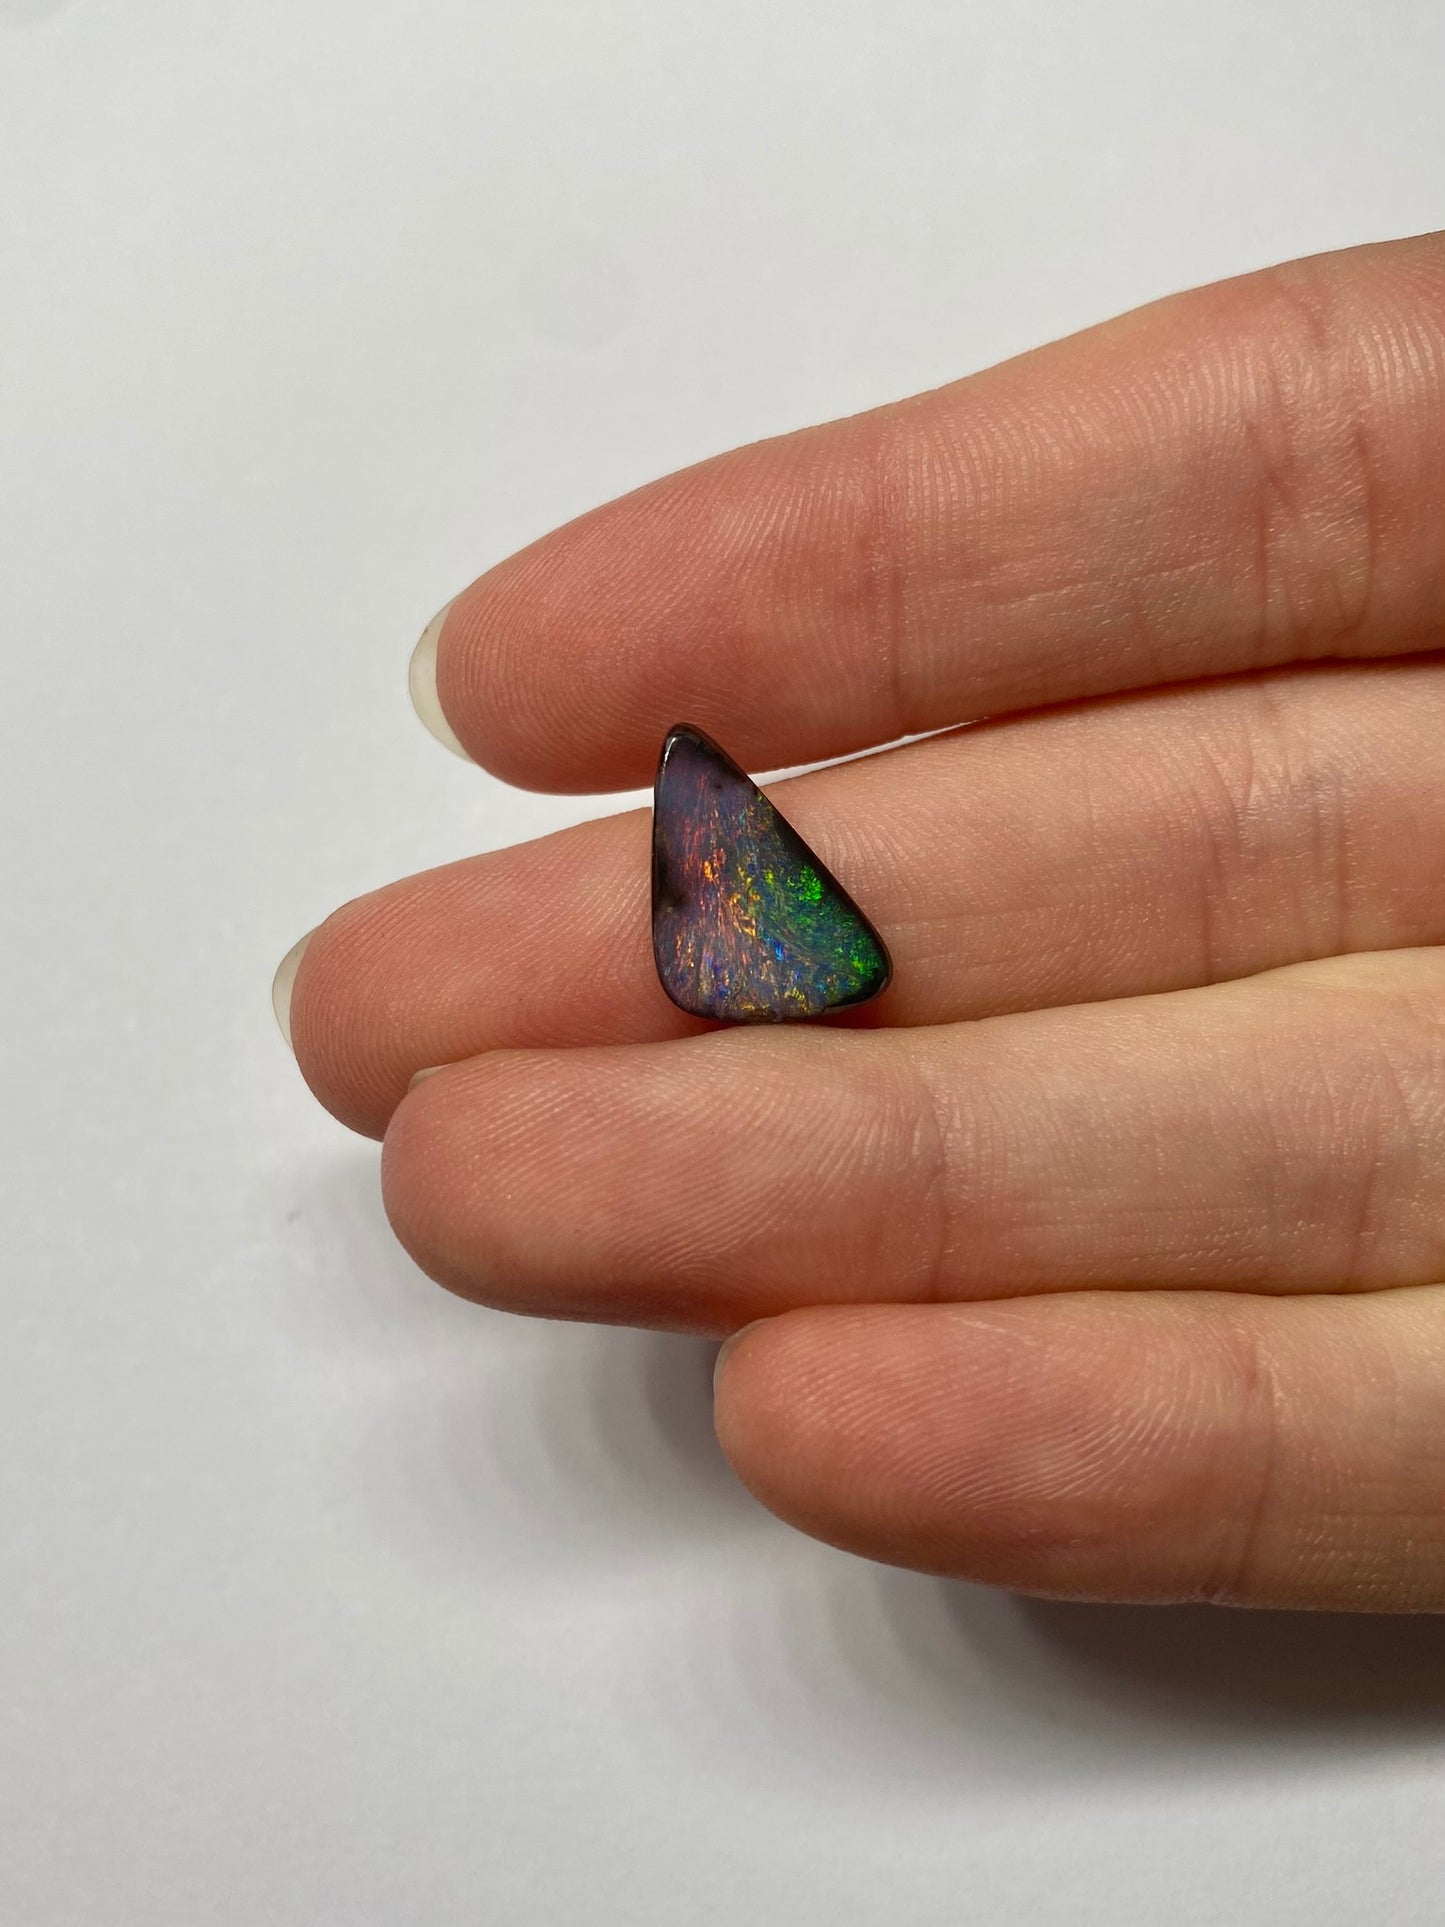 Fantasy Forest Opal - custom made in a ring for you